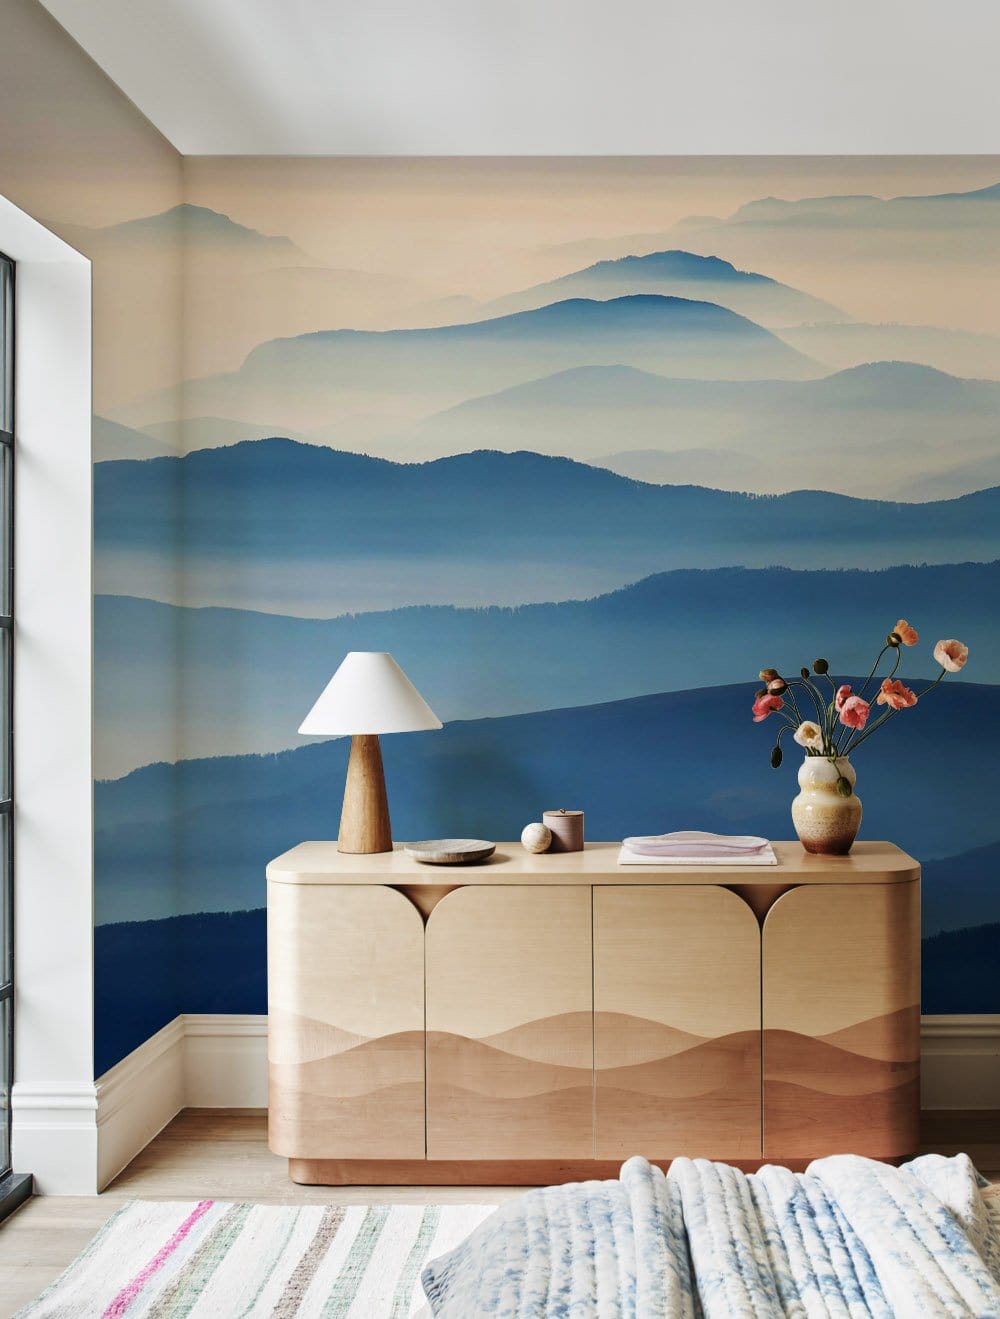 Wallpaper mural featuring blue rolling mountains, perfect for decorating the living room.